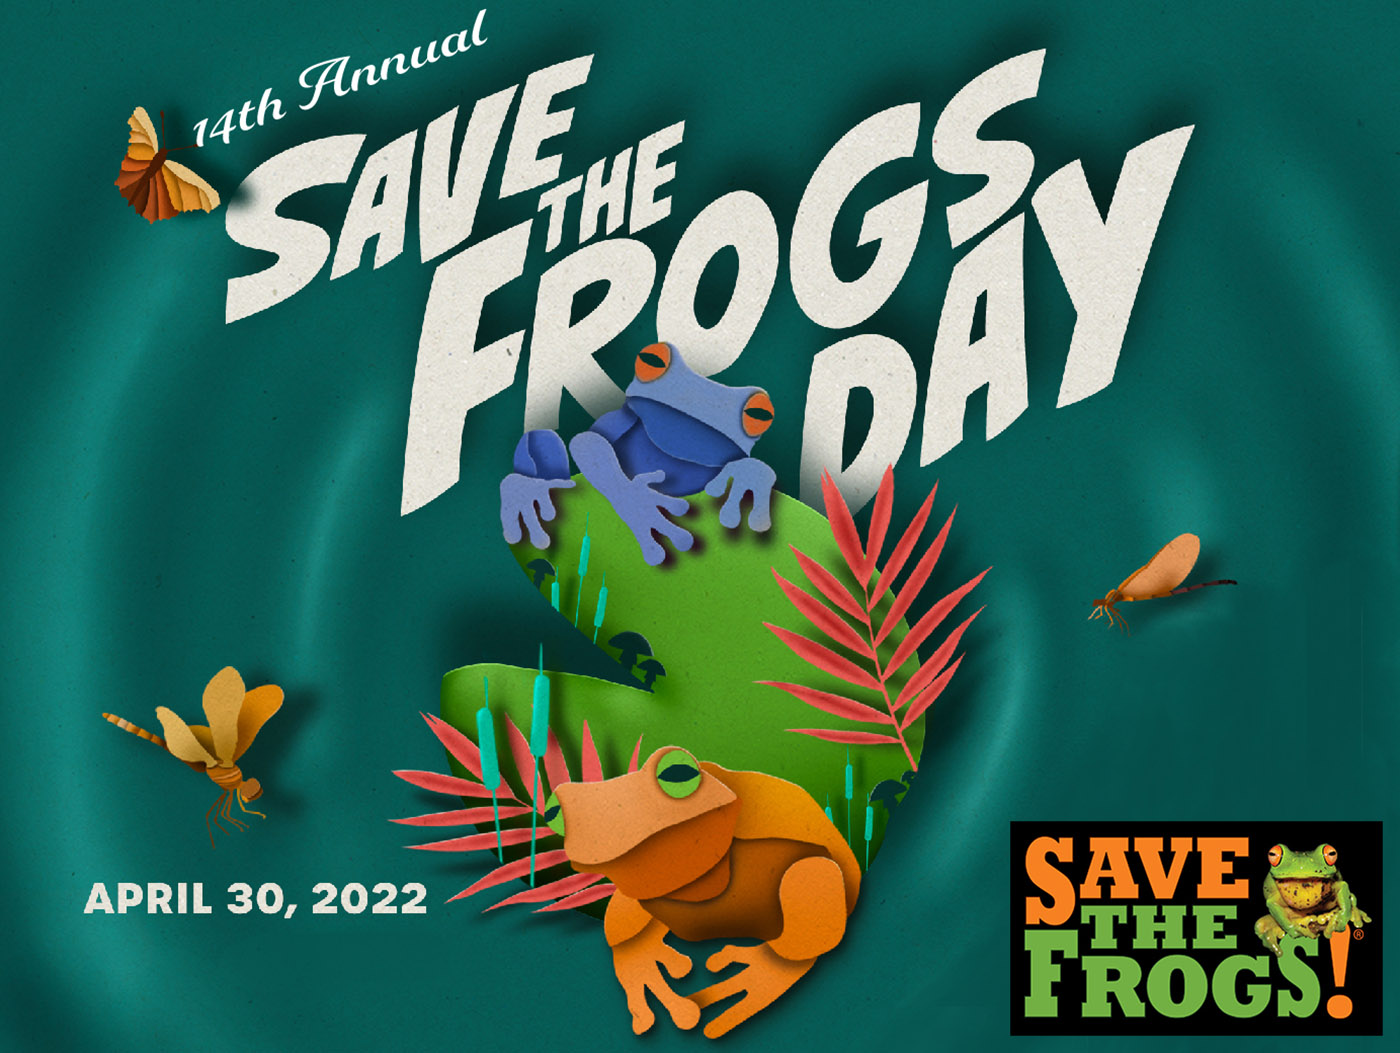 Calling All Frog Artists! The Save The Frogs Art Contest Your